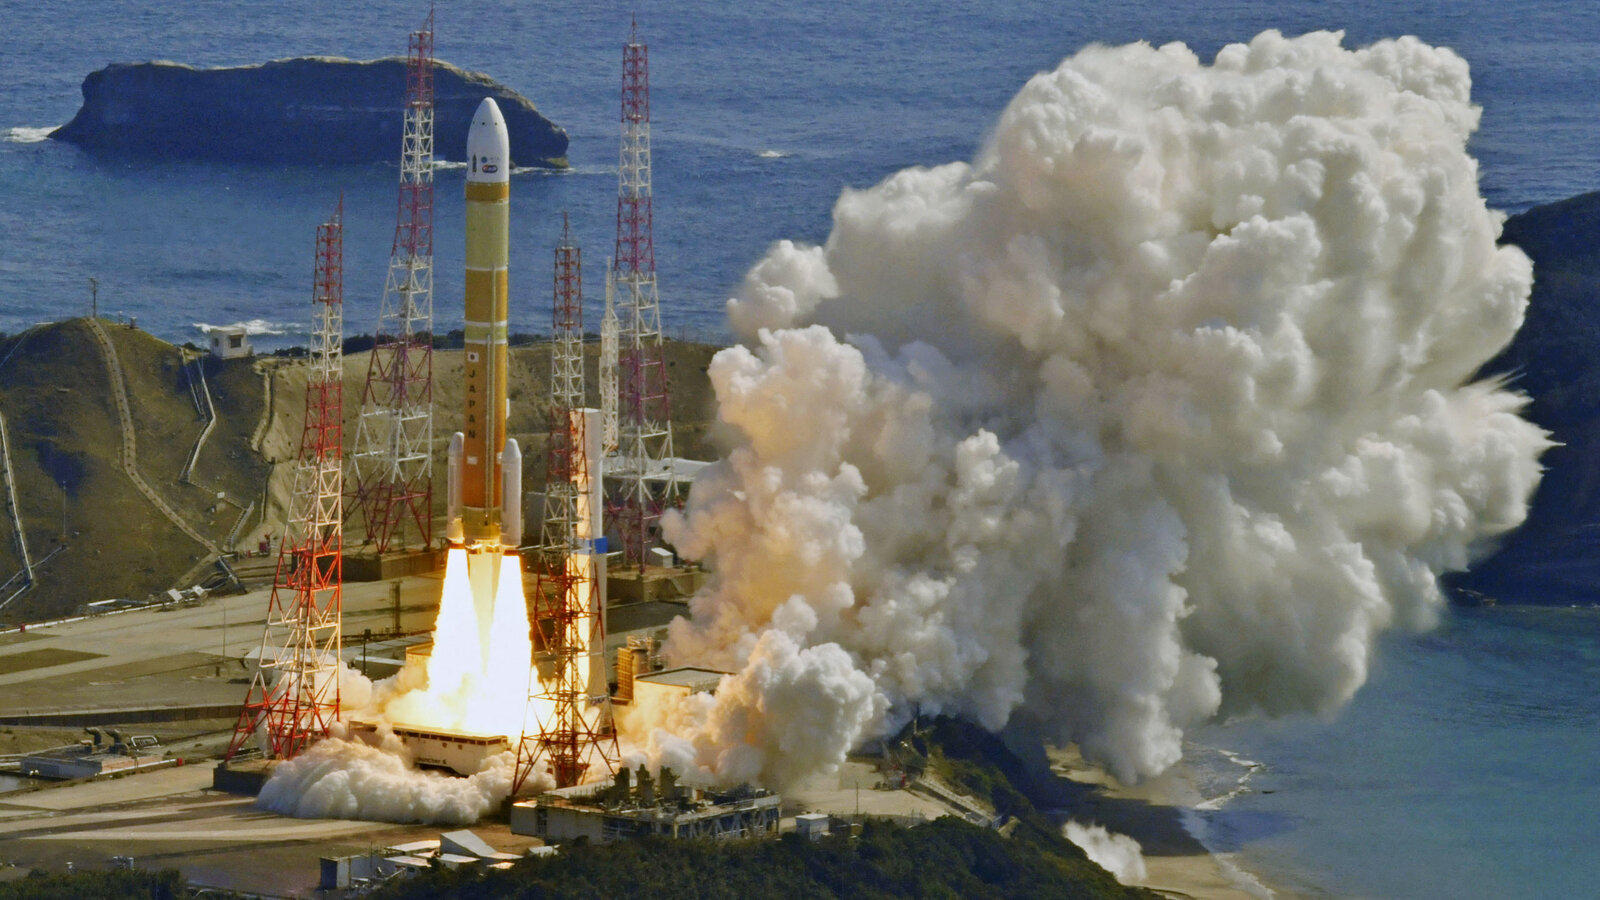 New Japanese Rocket Is Destroyed During First Test Flight to Space - The New York Times